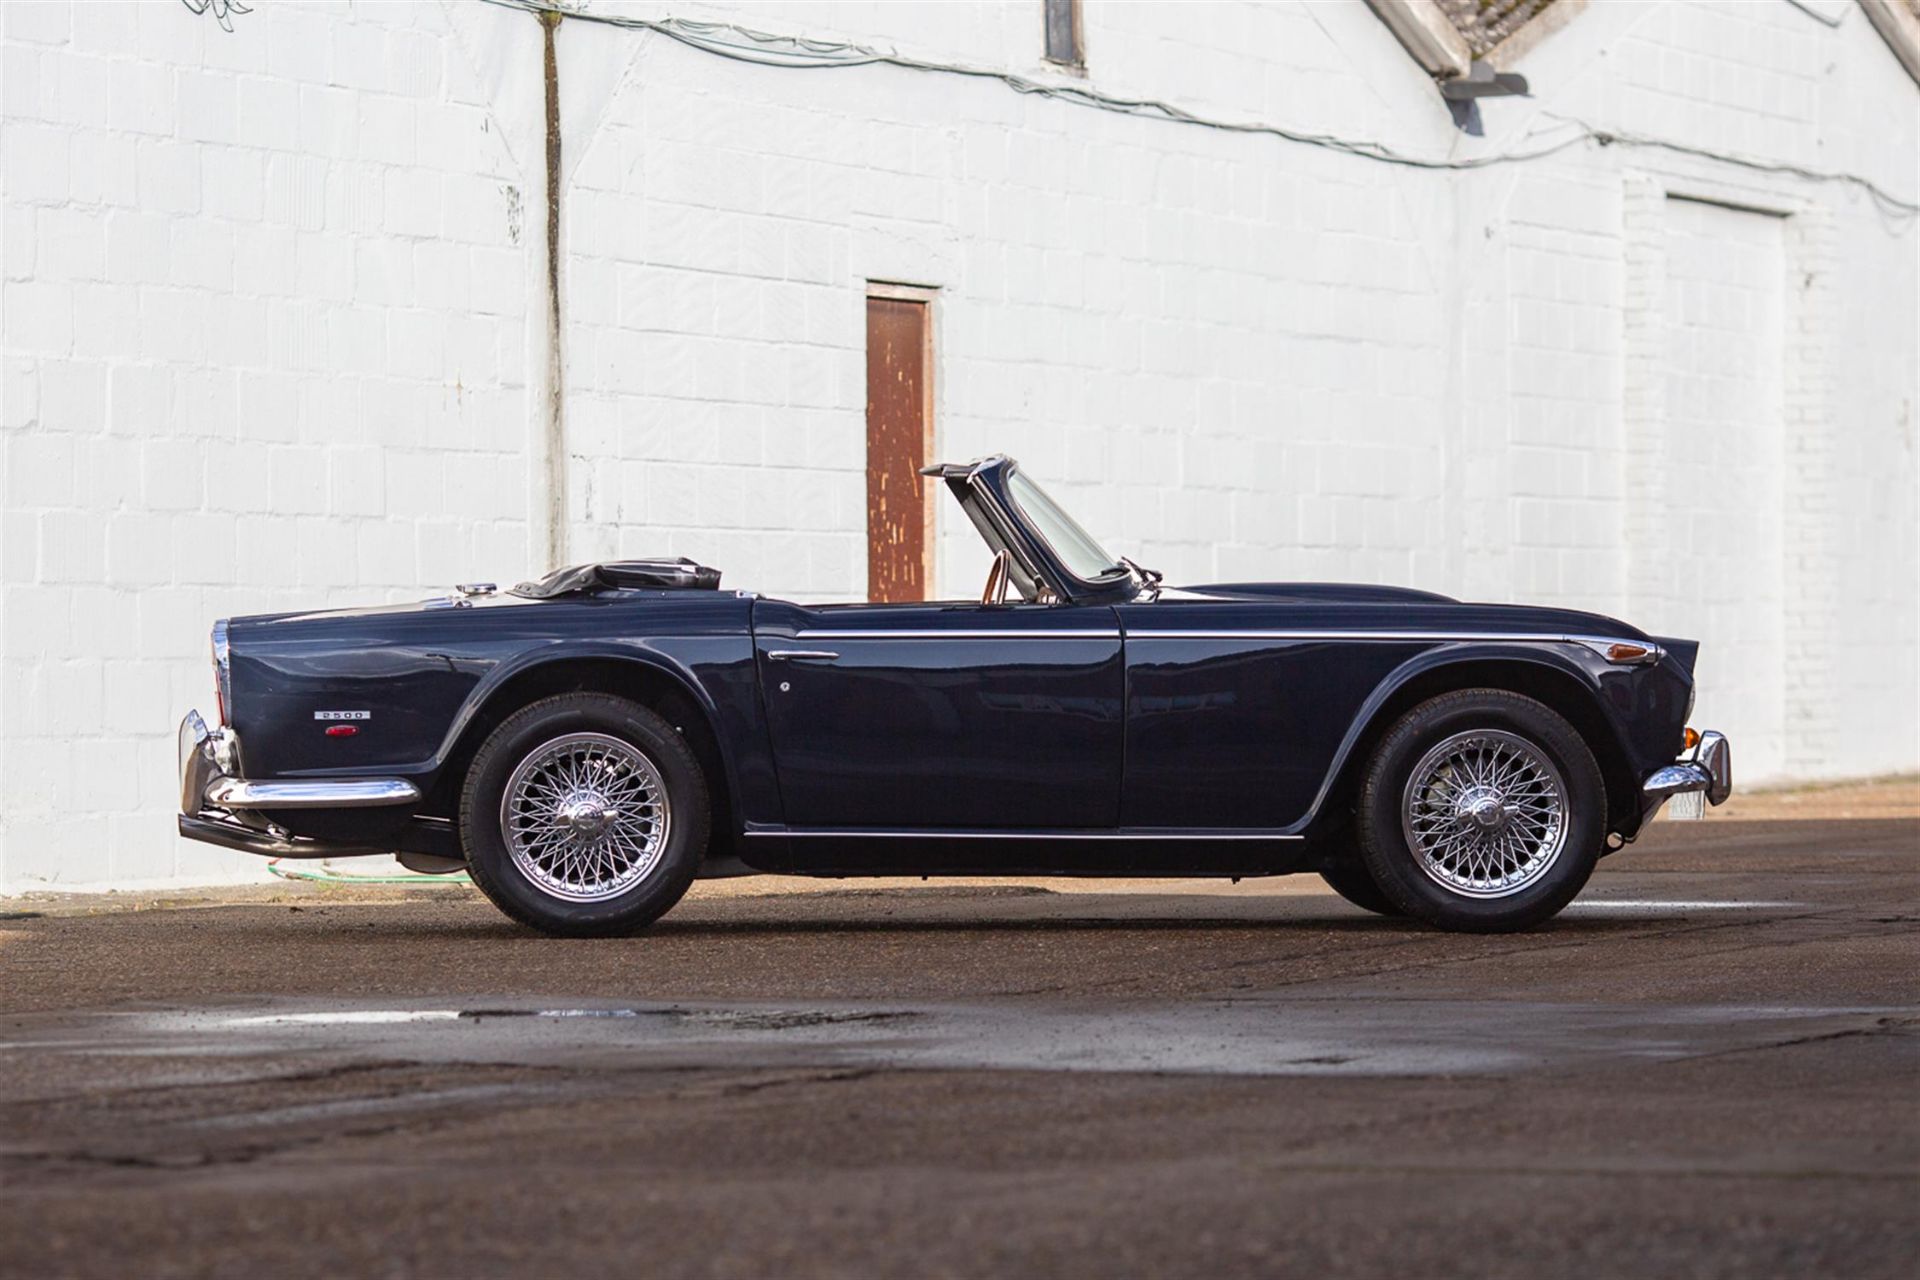 1967 Triumph TR5 - The First Ever TR5 - Image 5 of 10